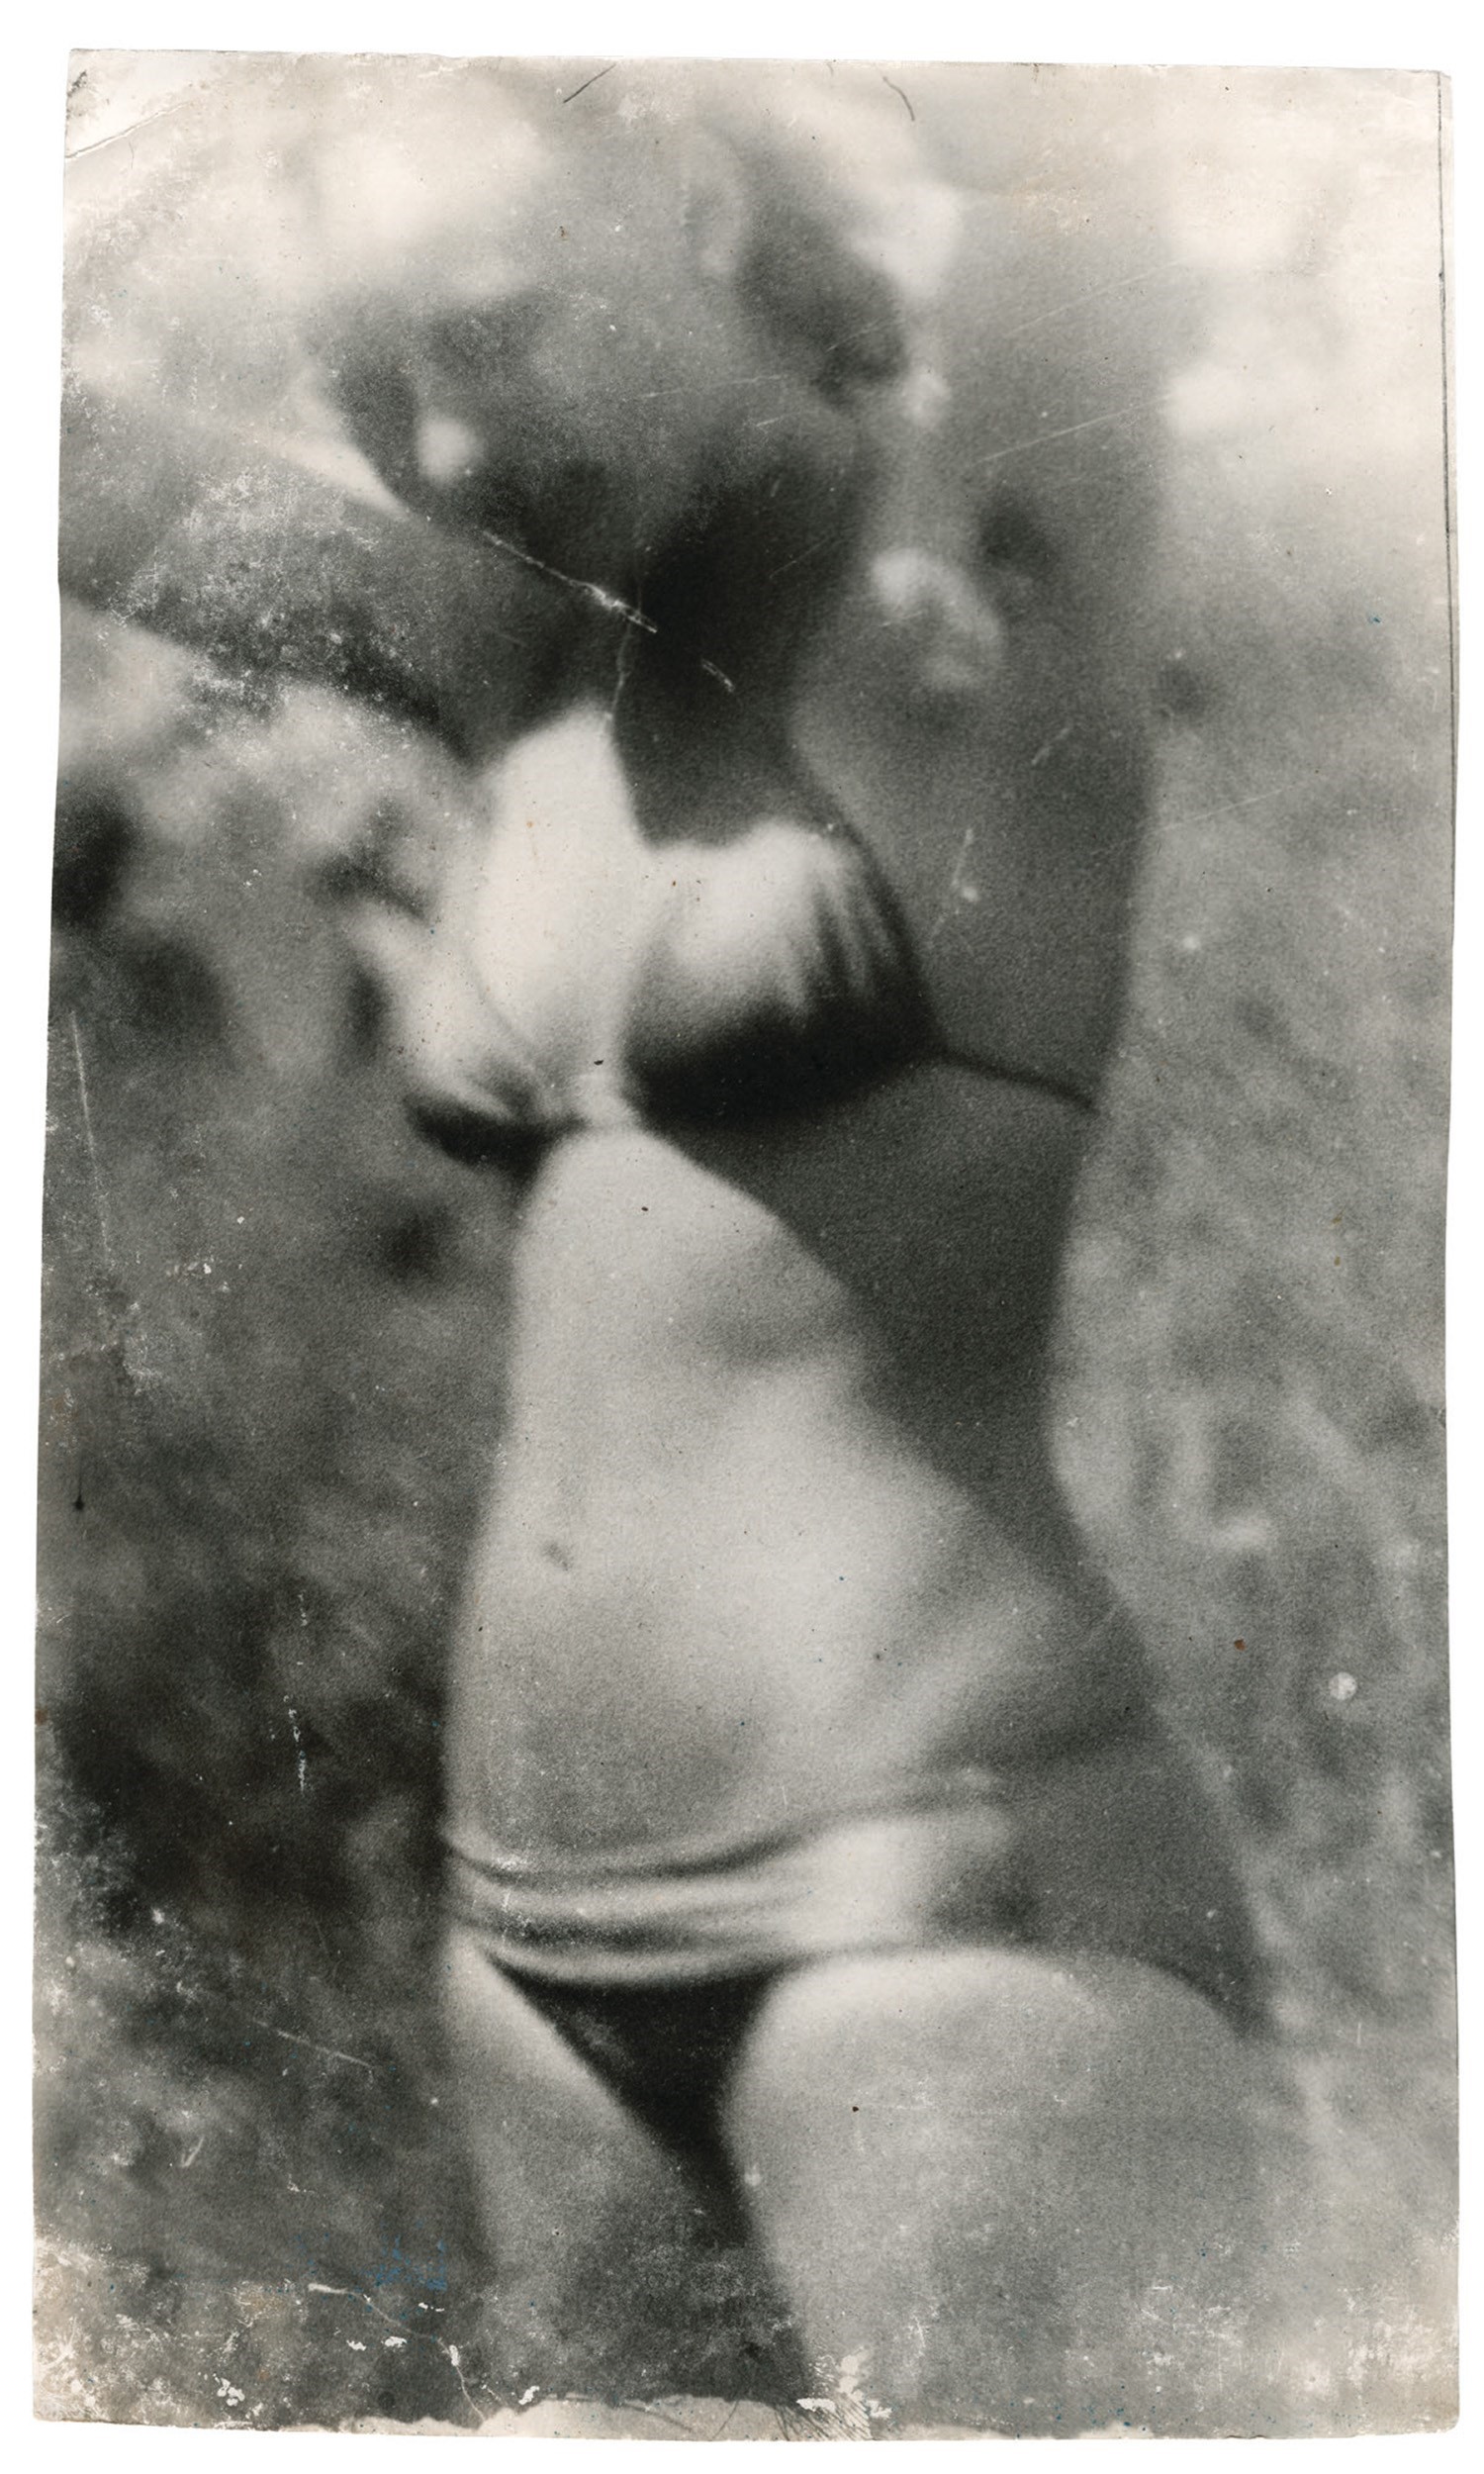 Miroslav Tichýs Mysterious Images of Unsuspecting Women AnotherMan